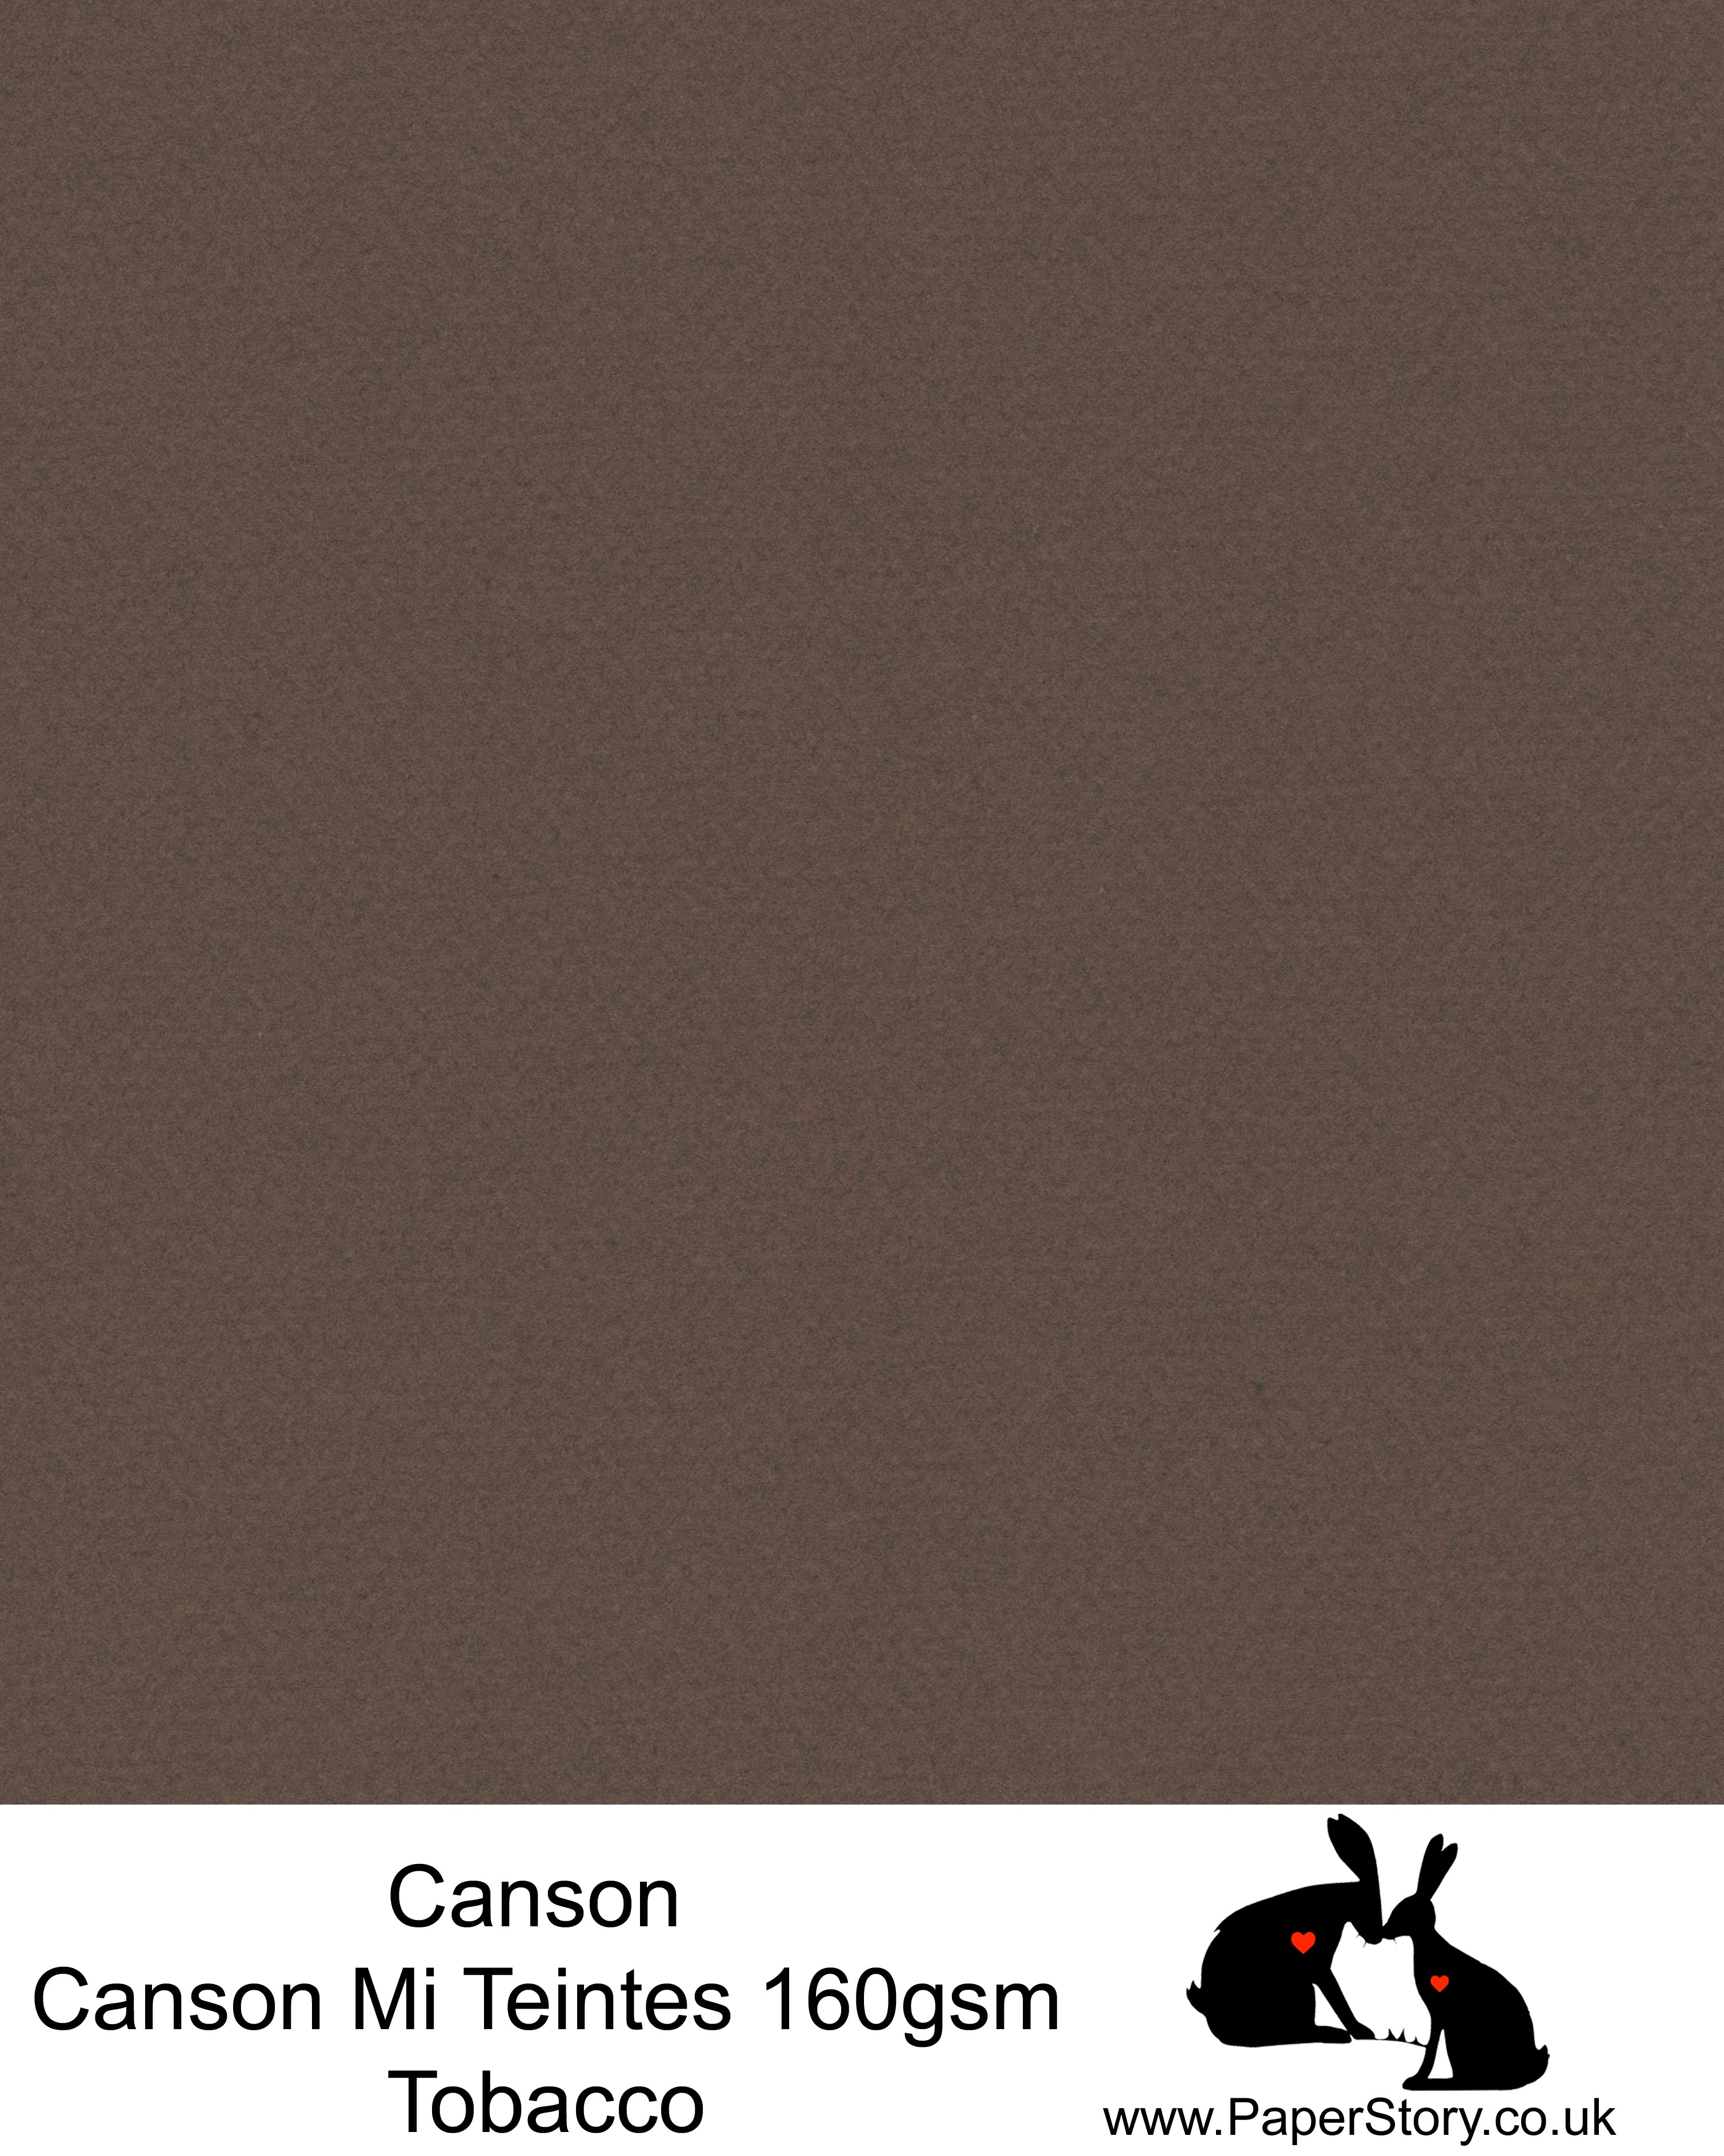 Canson Mi Teintes acid free, Red Brown hammered texture honeycomb surface paper 160 gsm. This is a popular and classic paper for all artists especially well respected for Pastel  and Papercutting made famous by Paper Panda. This paper has a honeycombed finish one side and fine grain the other. An authentic art paper, acid free with a  very high 50% cotton content. Canson Mi-Teintes complies with the ISO 9706 standard on permanence, a guarantee of excellent conservation 